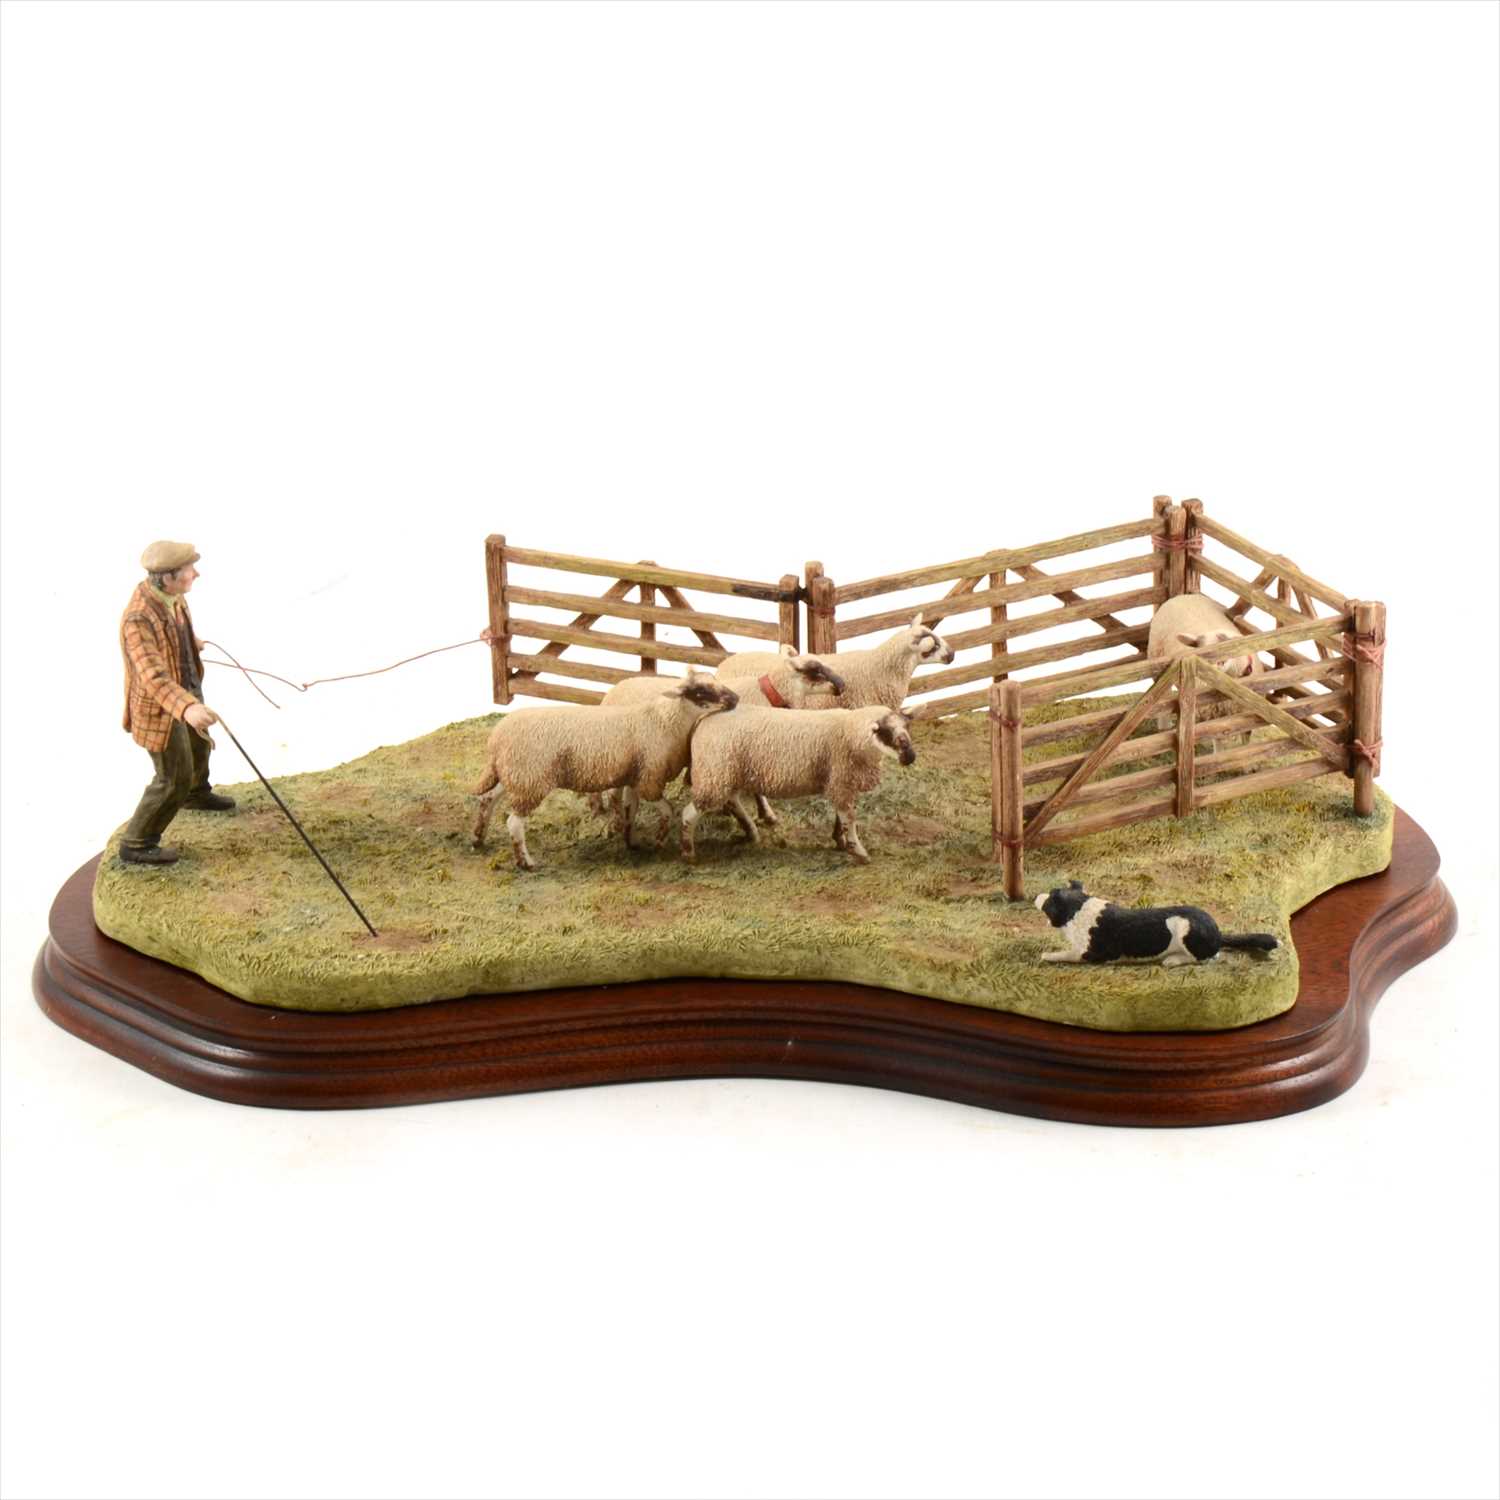 Lot 49 - Border Fine Arts - "Anxious Moment - Penning Sheep", limited edition 320/1750.